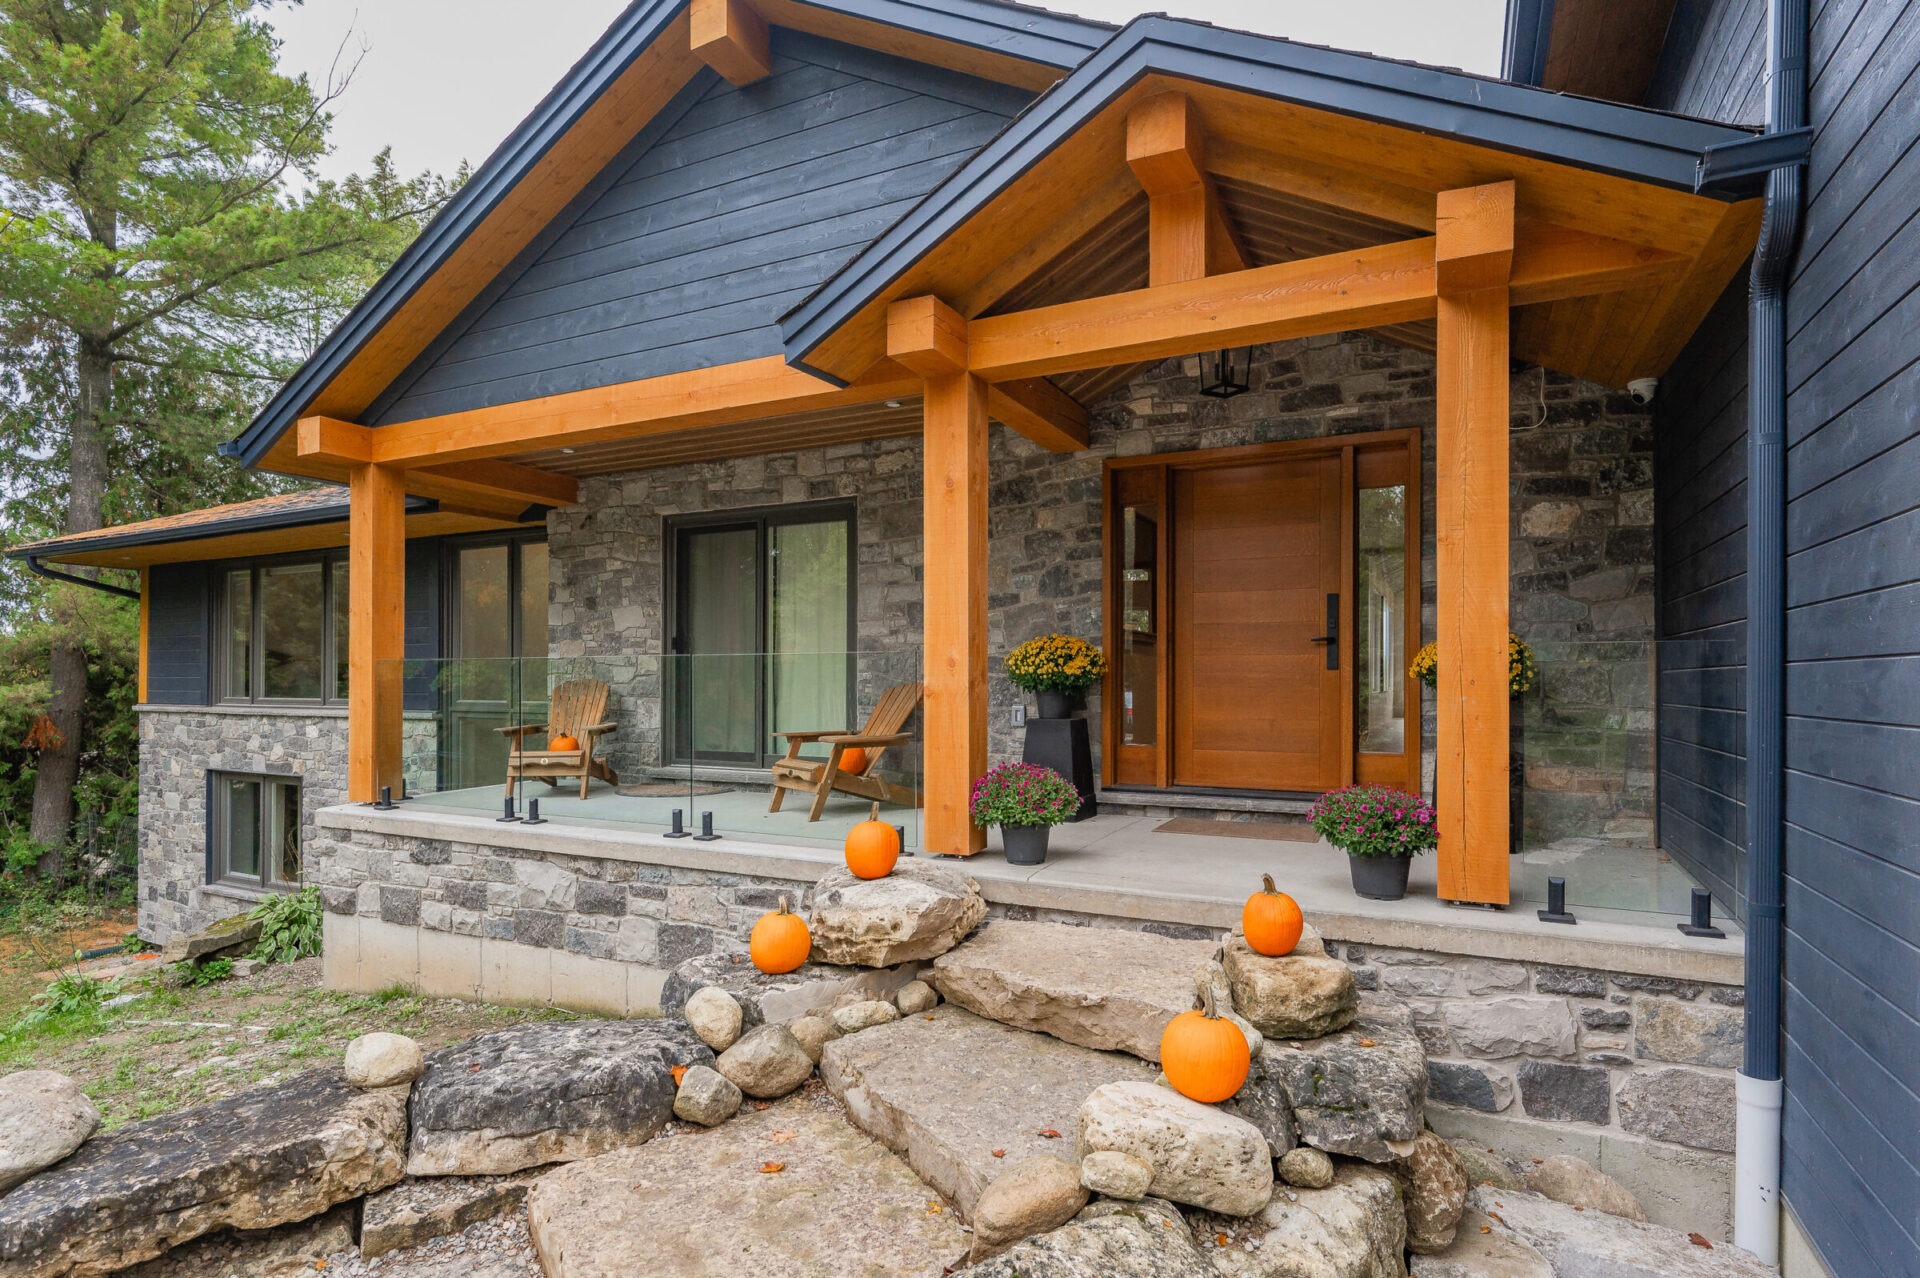 This image shows the exterior of a modern house with a dark facade, wood accents, a stone porch, sliding glass doors, and seasonal decorations including pumpkins.